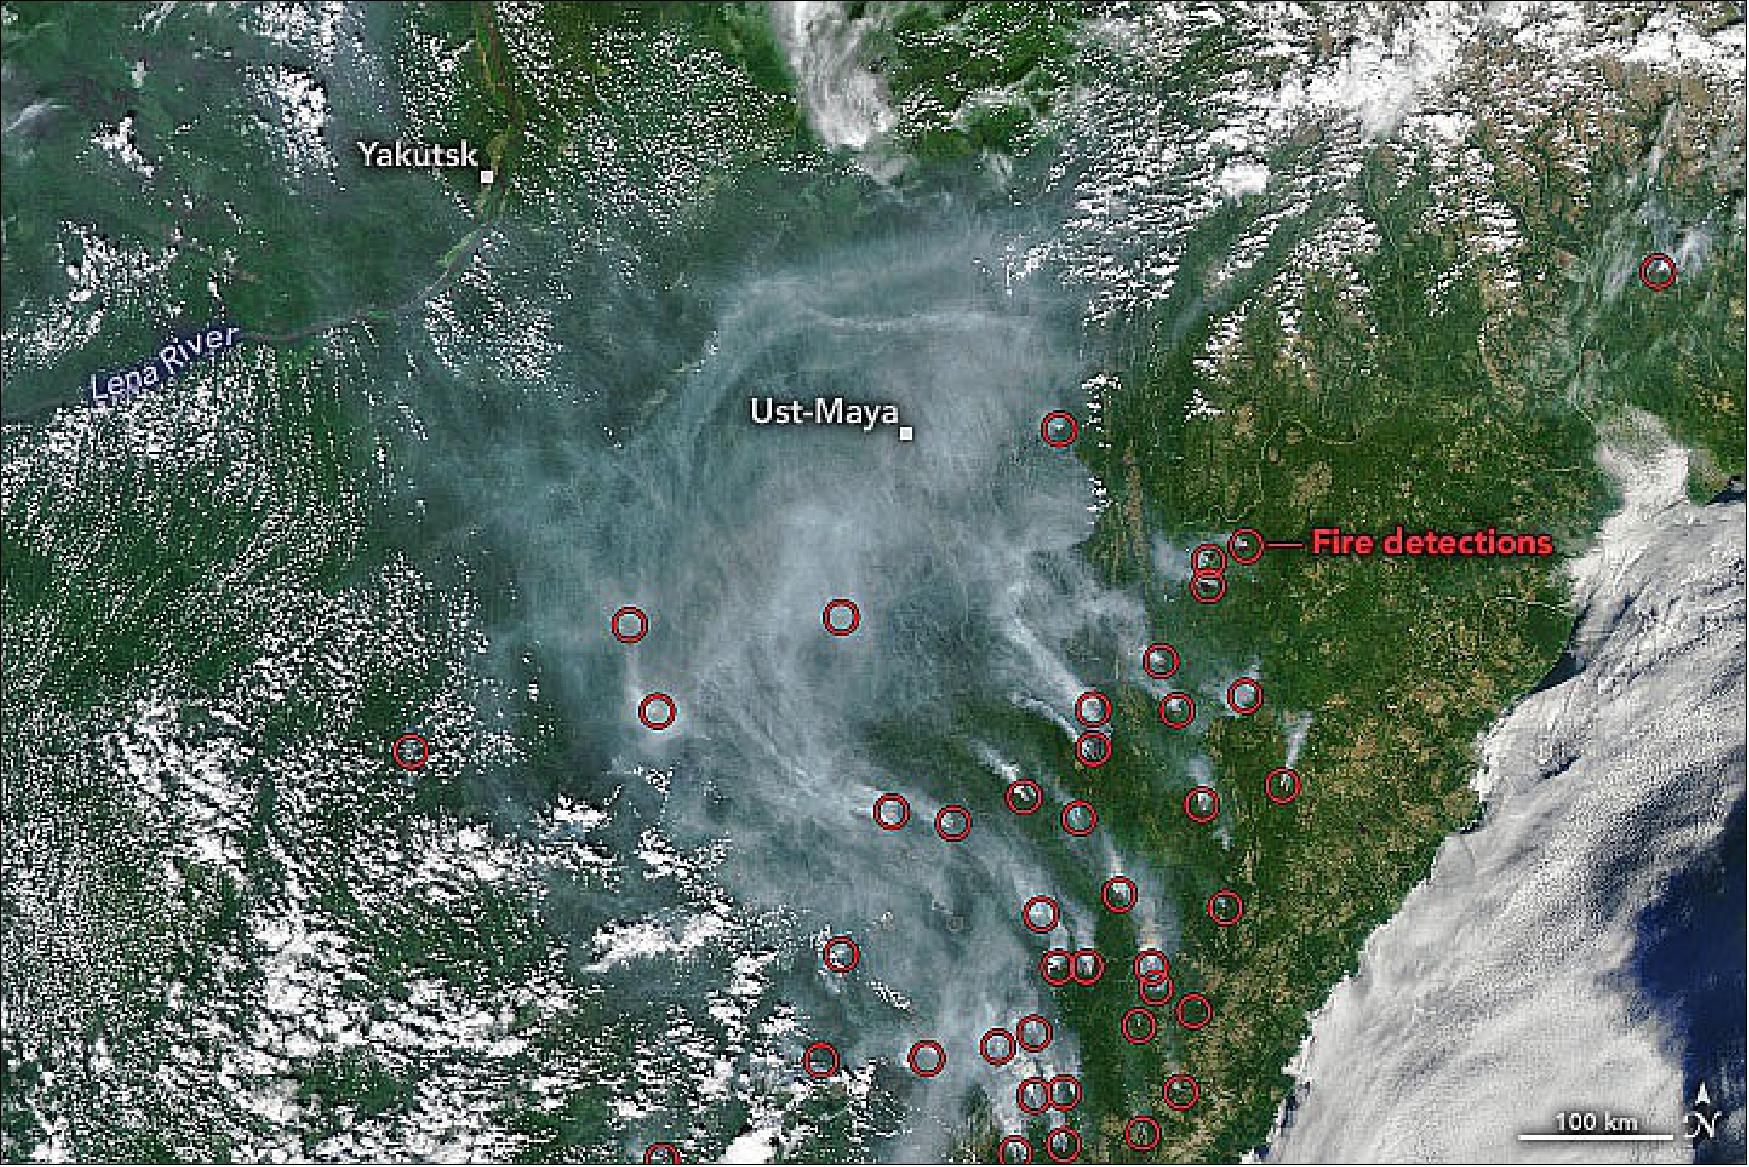 Figure 5: The MODIS instrument on NASA’s Aqua satellite captured this natural-color image of smoke swirling over the region on July 17, 2022. The image has been overlaid with red circles indicating locations where MODIS detected heat signatures indicative of fire. Many of the fires were burning in the Ayano-Maysky district of Khabarovsk, which is home to larch forests and the circular Kondyor massif (image credit: NASA Earth Observatory image by Joshua Stevens, using MODIS data from NASA EOSDIS LANCE and GIBS/Worldview, and data from the Fire Information for Resource Management System (FIRMS). Story by Adam Voiland)